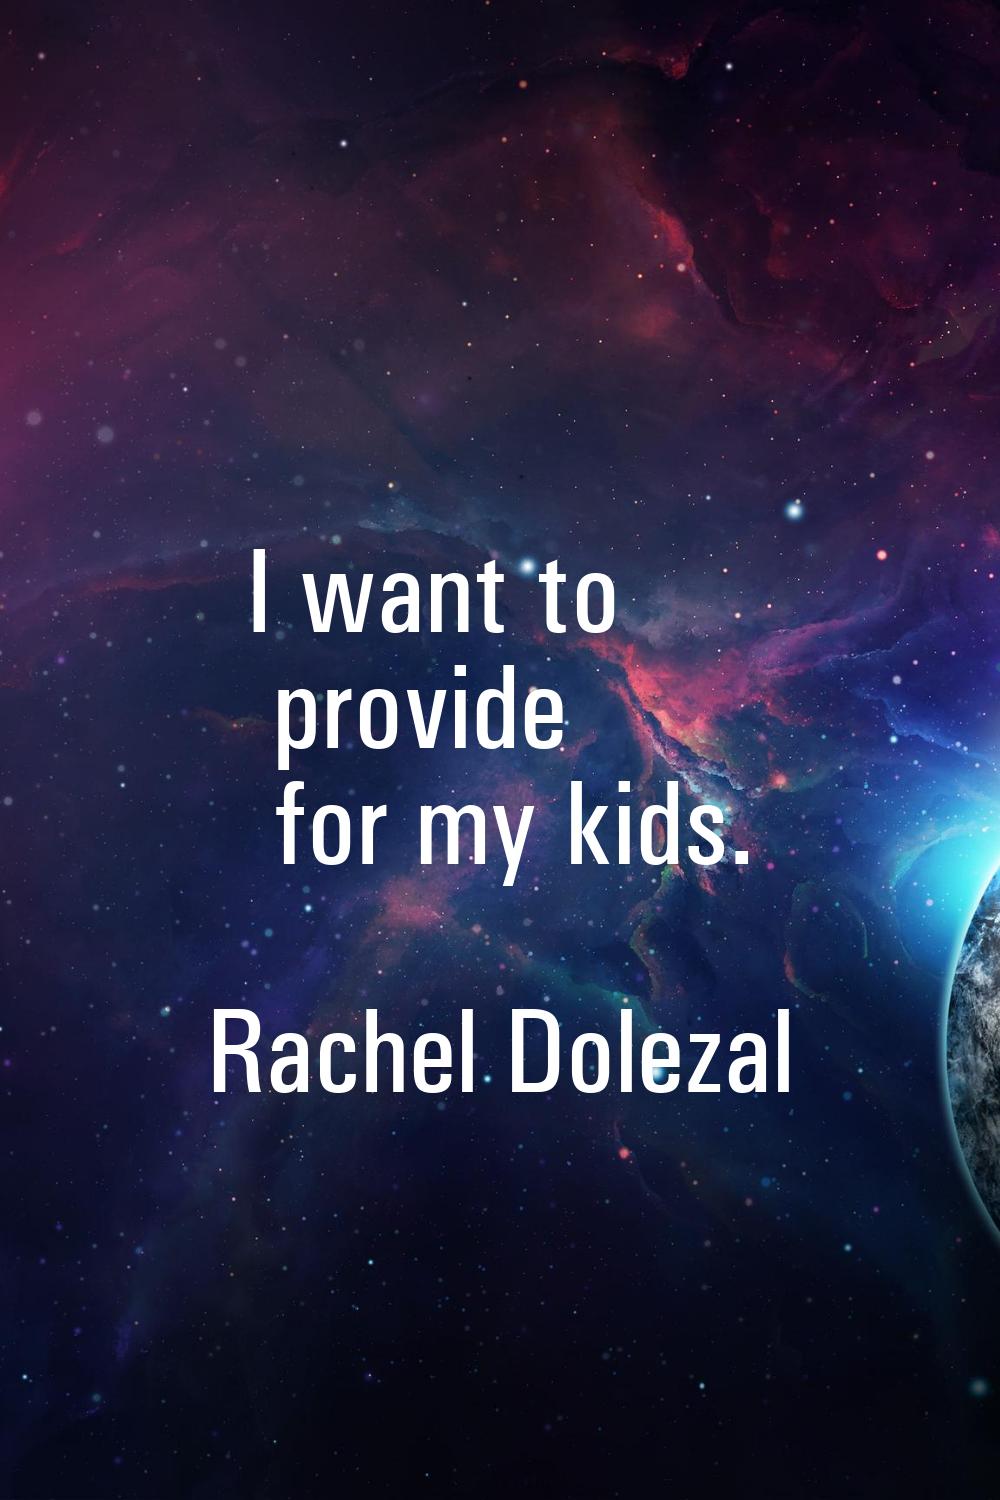 I want to provide for my kids.